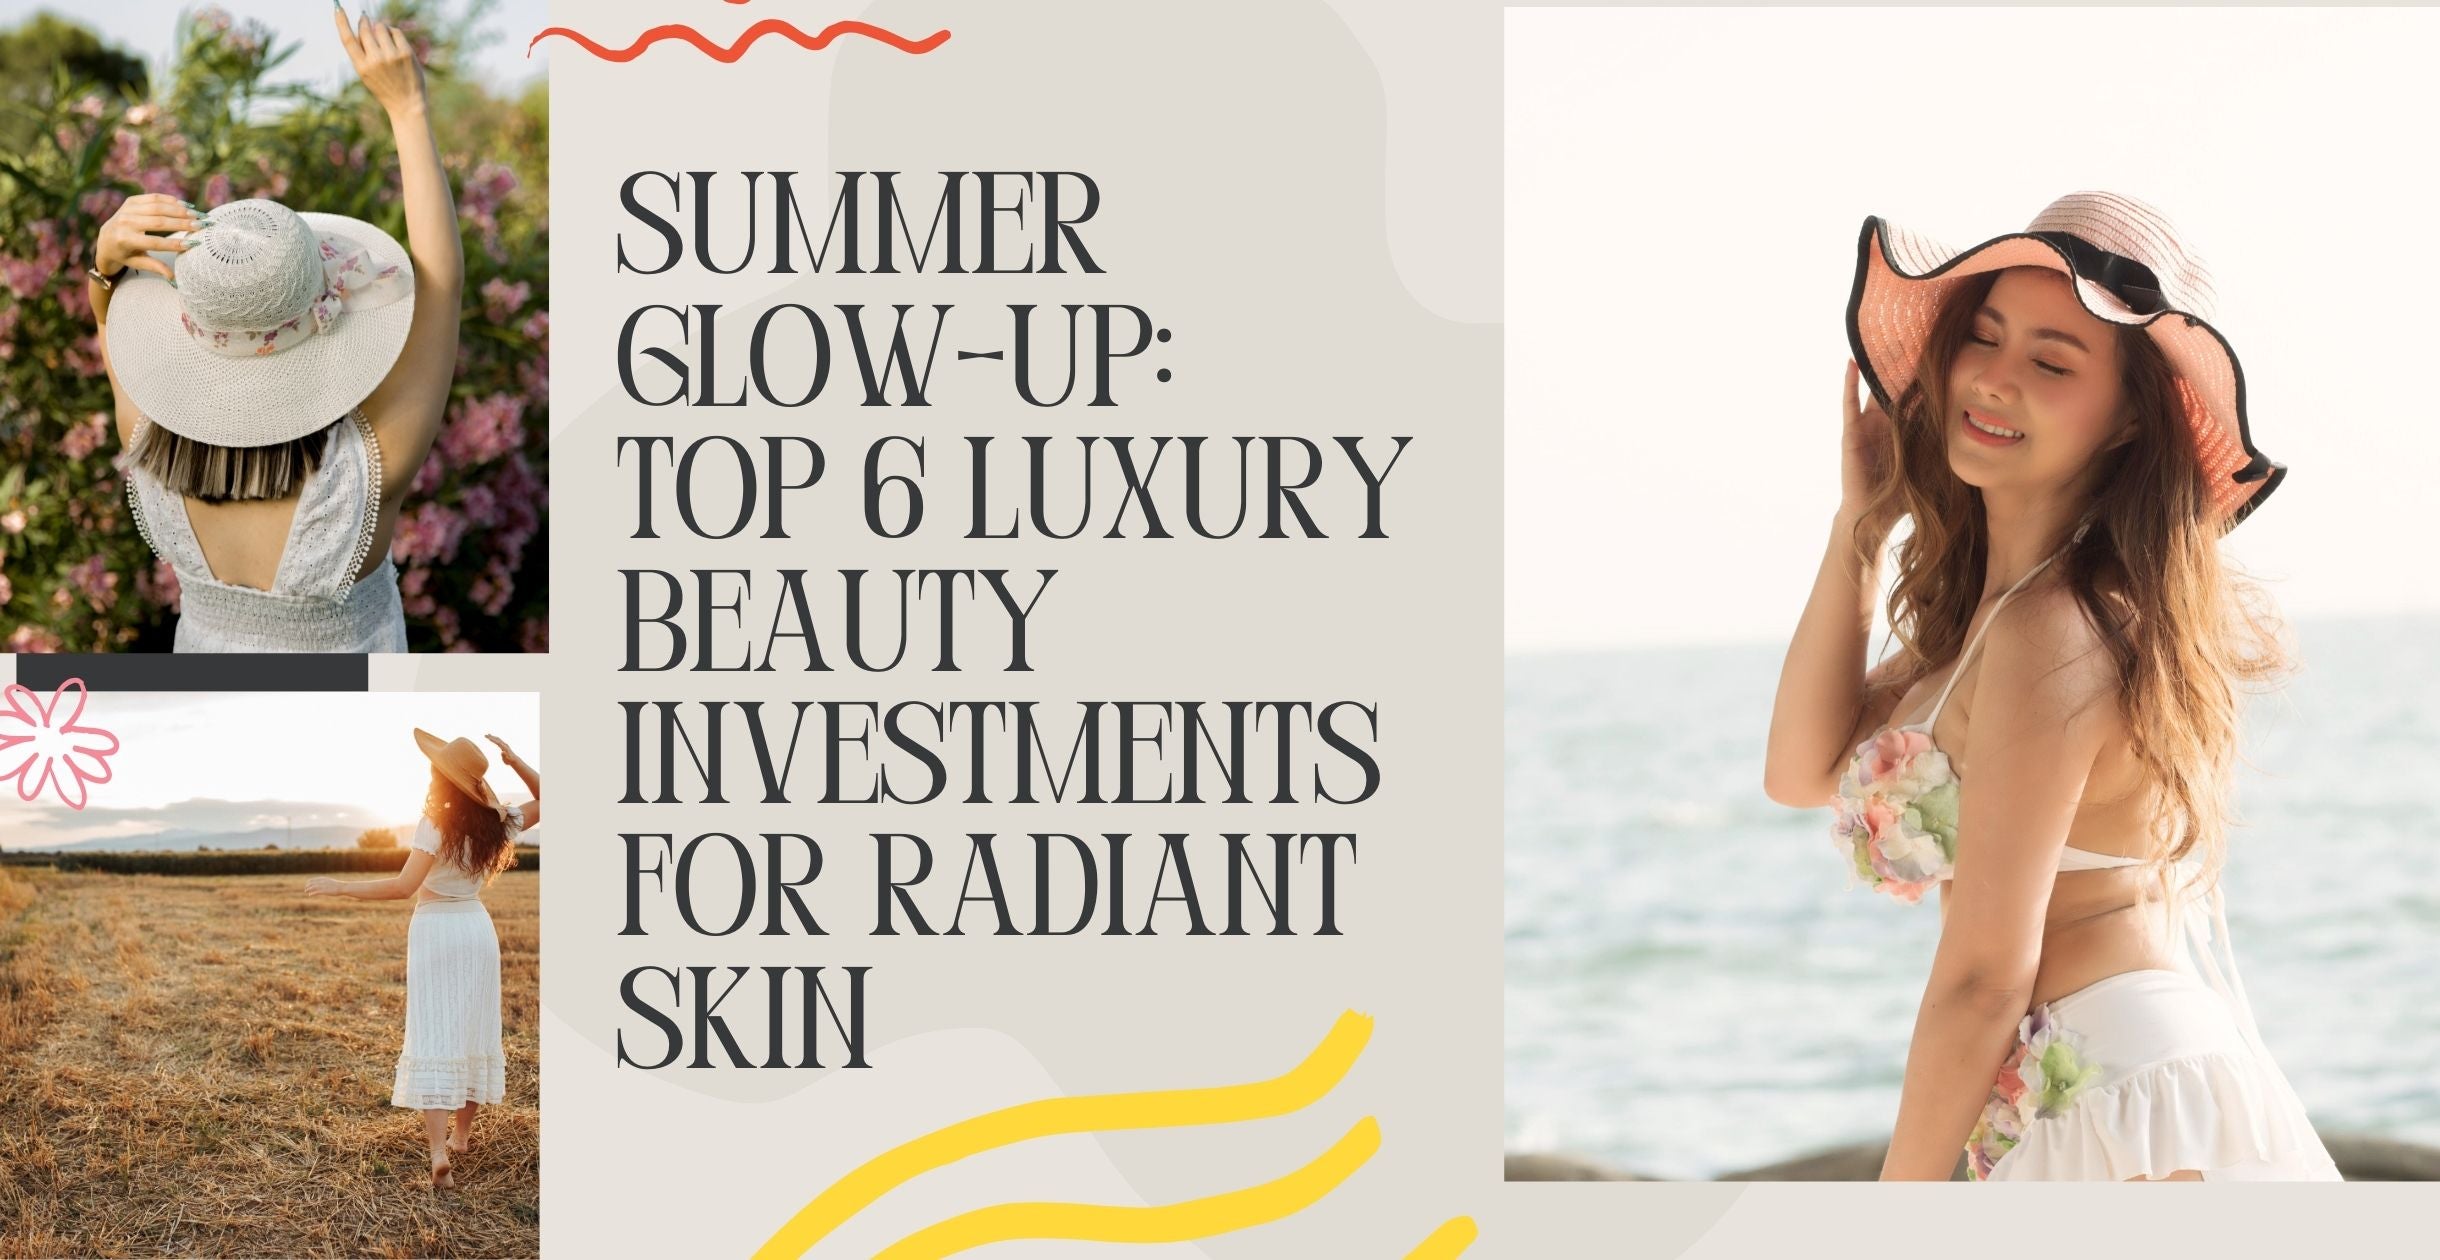 Summer Glow-Up: Top 6 Luxury Beauty Investments for Radiant Skin